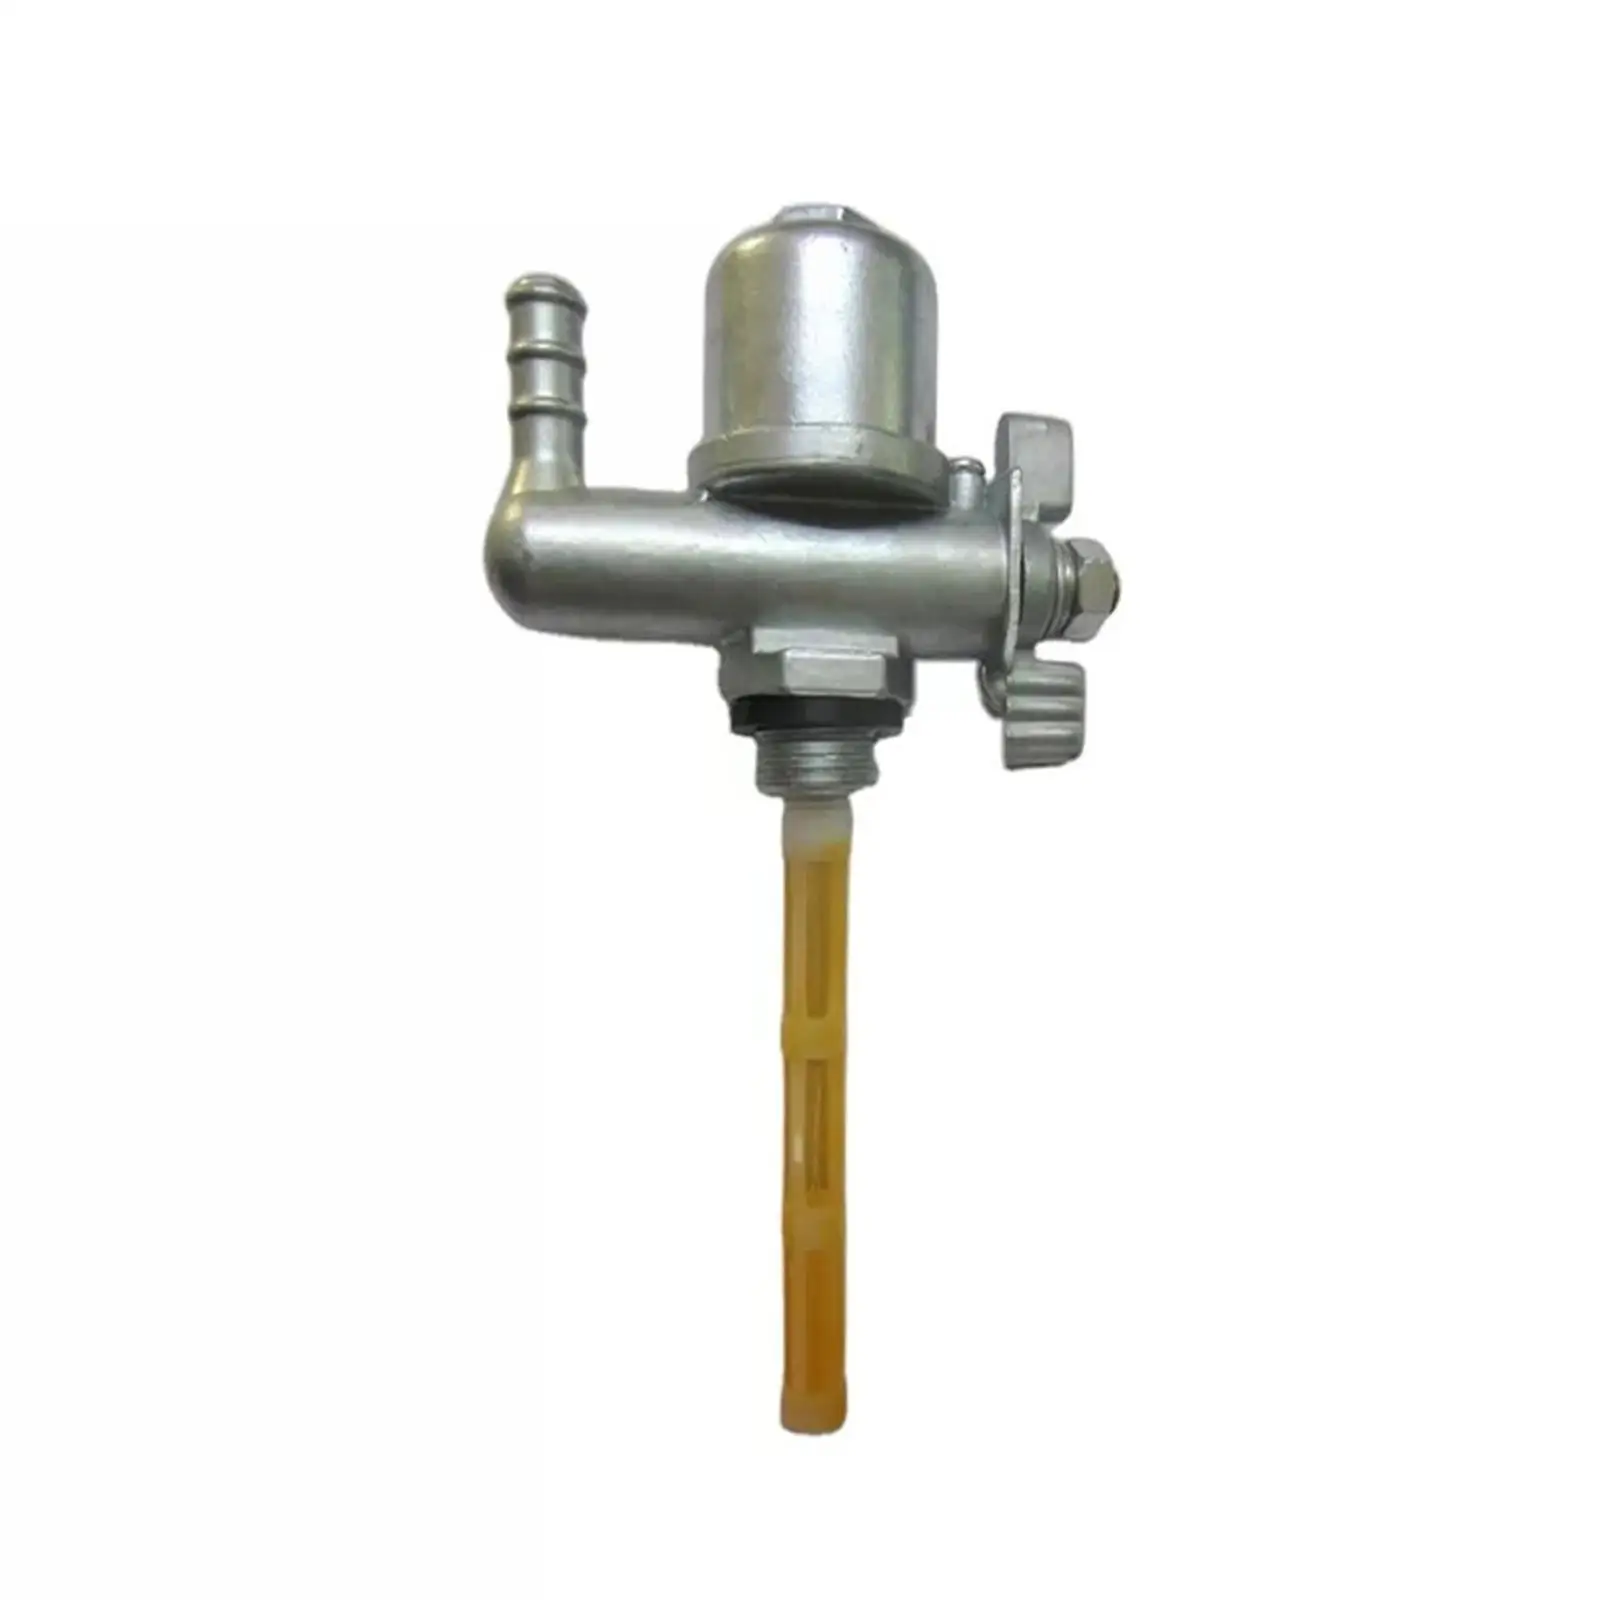 Fuel Gas Petcock Valve Switch Replace for Ruassia Msk Durable Supplies